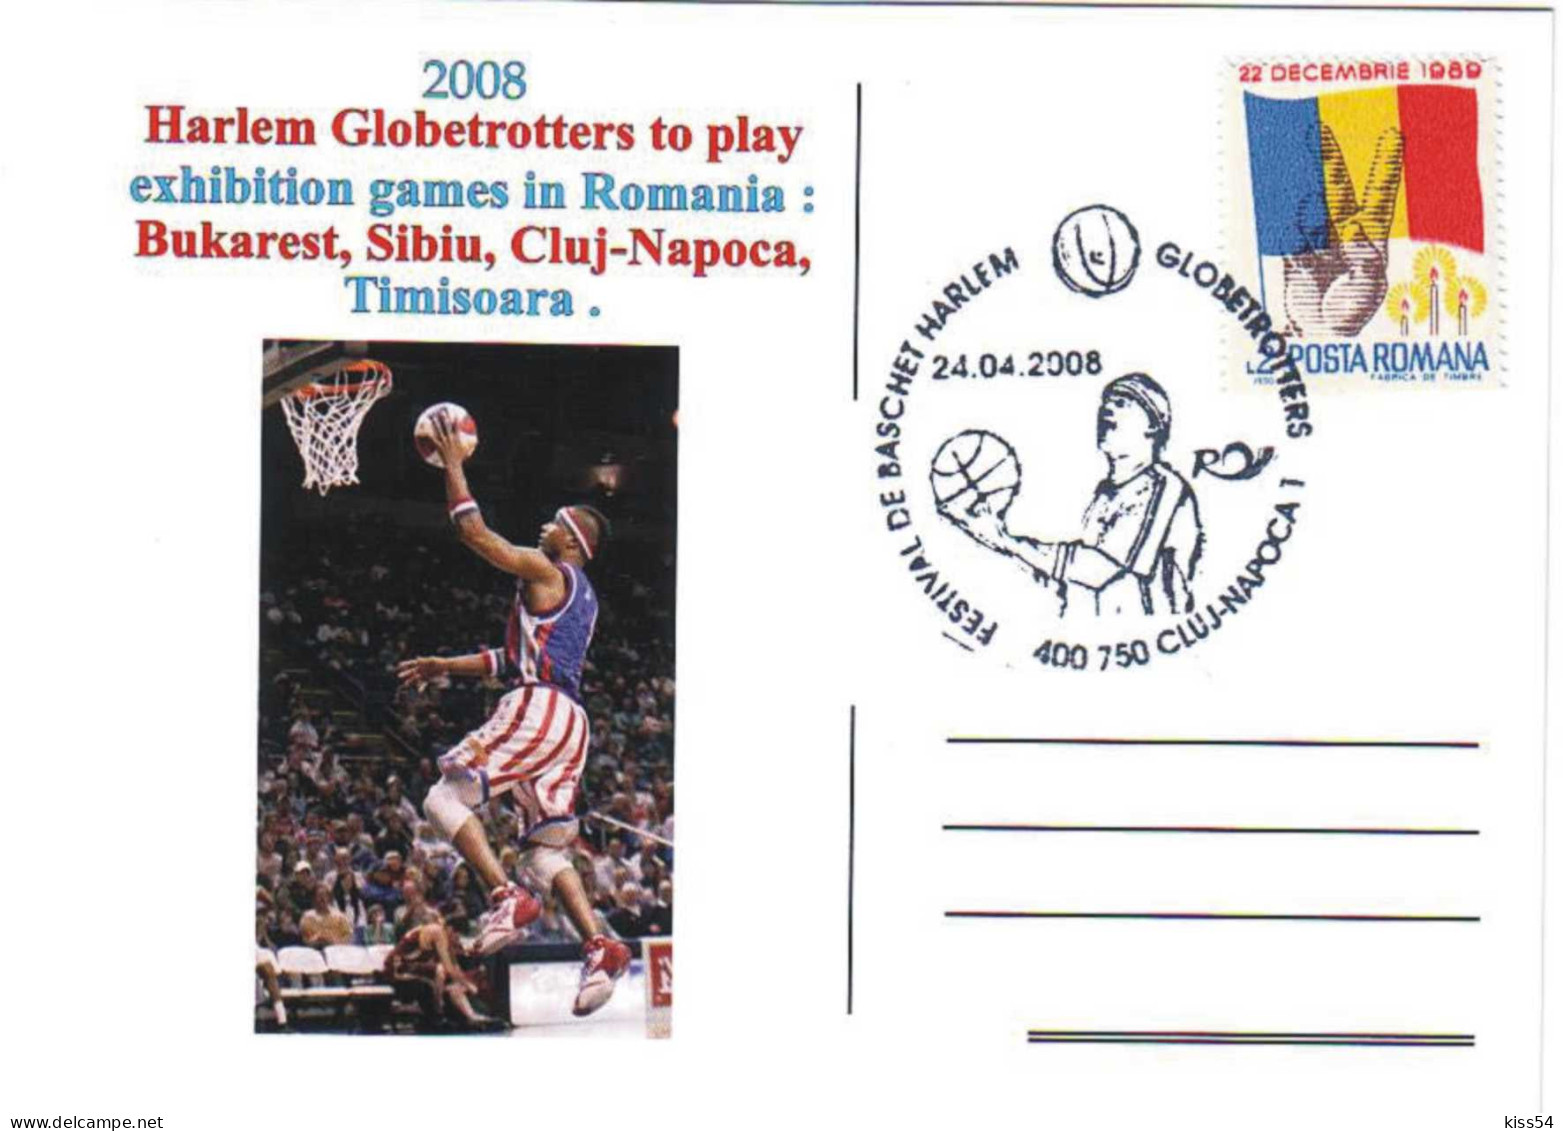 COV 995 - 280 BASKETBALL, Harlem Globetrotters, Romania - Cover - Used - 2005 - Covers & Documents